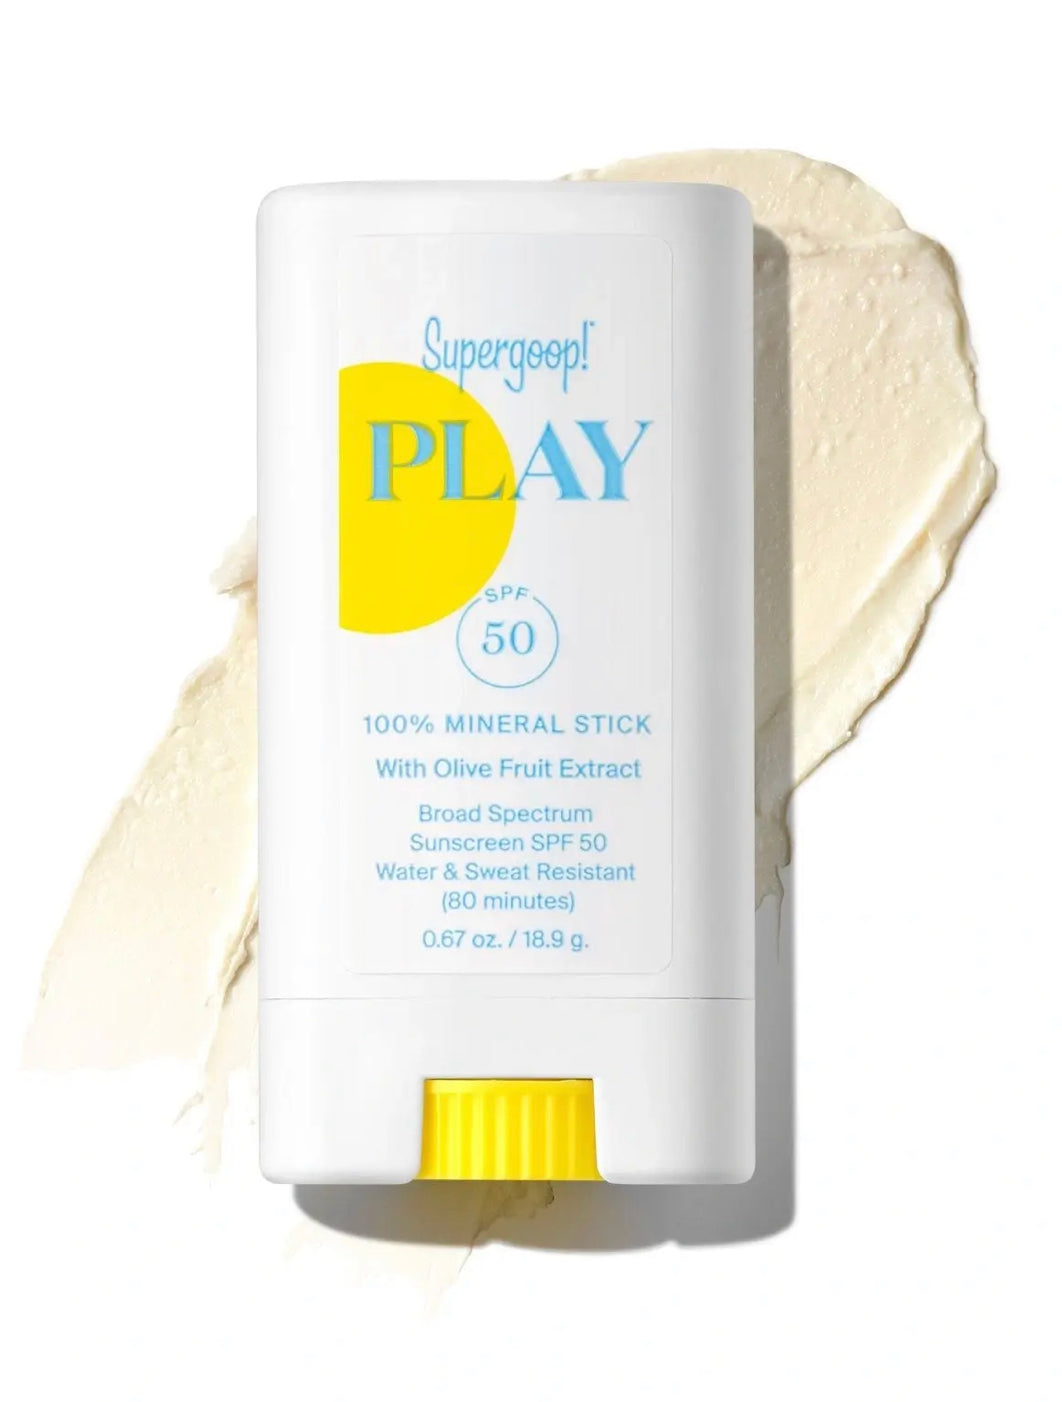 PLAY 100% Mineral Stick SPF 50 with Olive Fruit Extract (0.67 oz.)